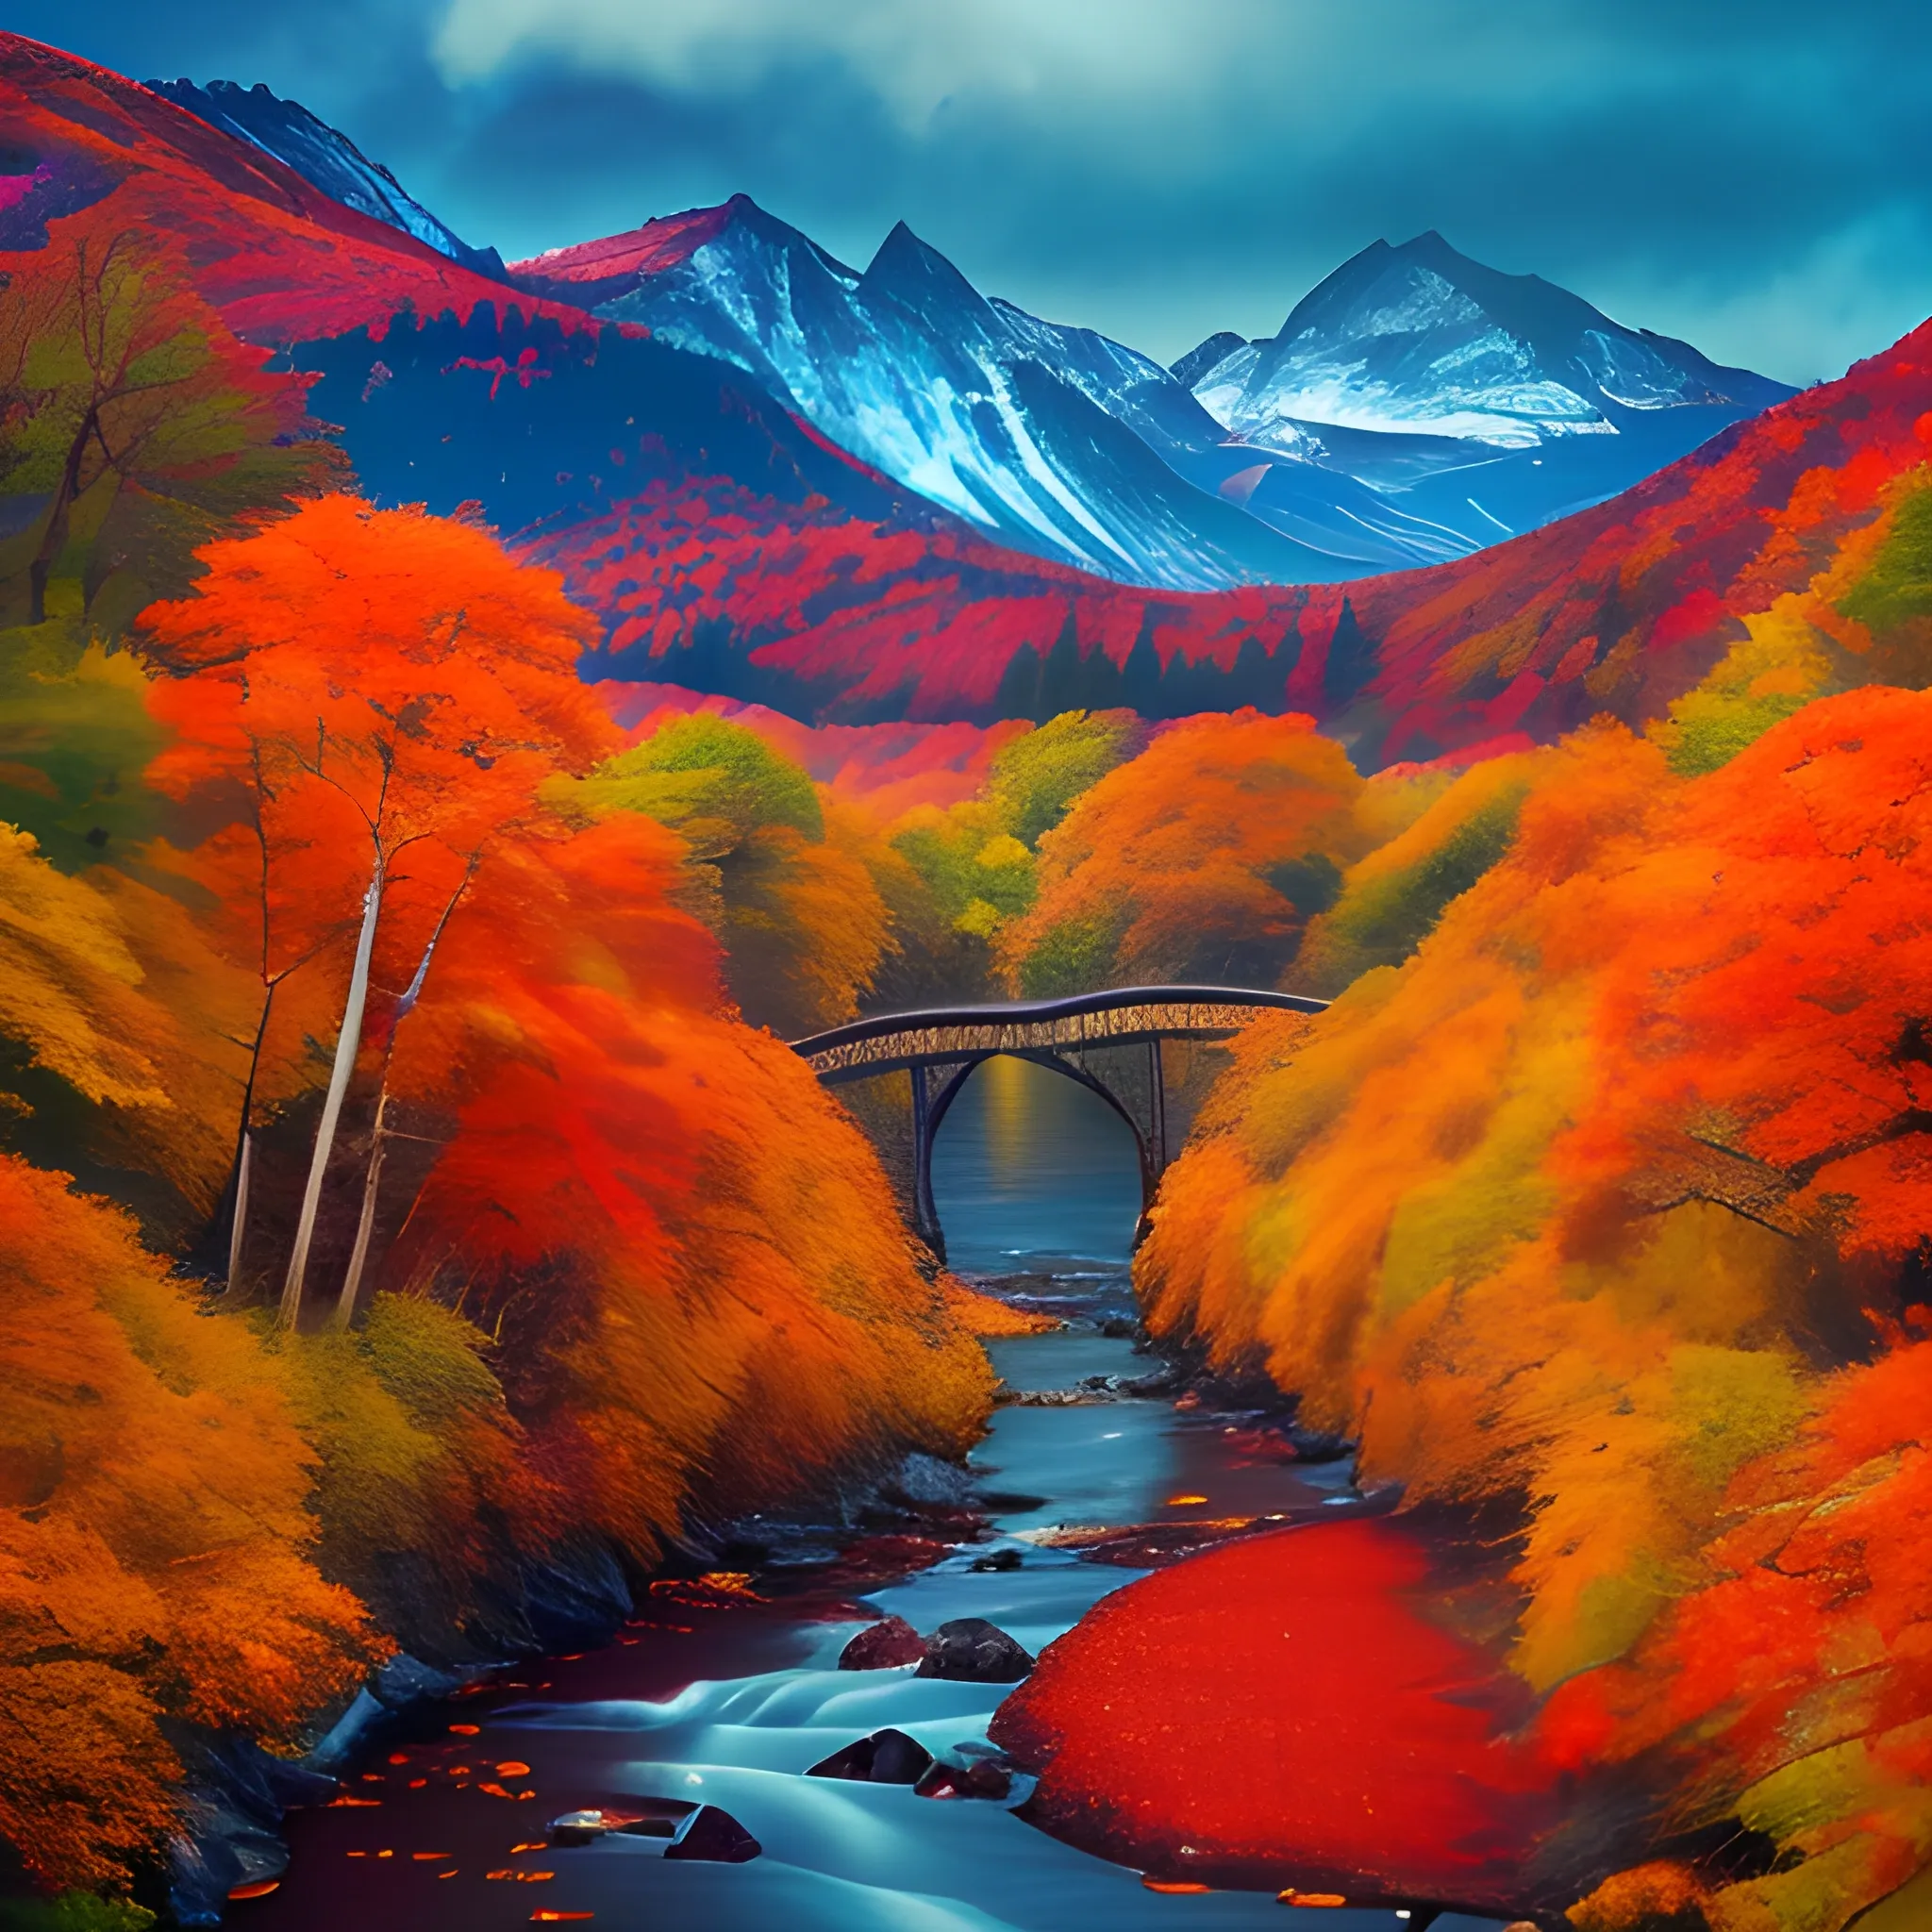 "Immerse yourself in the breathtaking beauty of autumn with stunning 4K imagery. Experience the vibrant colors and intricate details of the fall season like never before. From picturesque landscapes to close-up shots of falling leaves, this collection showcases the essence of autumn in a mesmerizing 9:16 aspect ratio. Get ready to be captivated by the crispness, clarity, and vividness of these remarkable visuals."